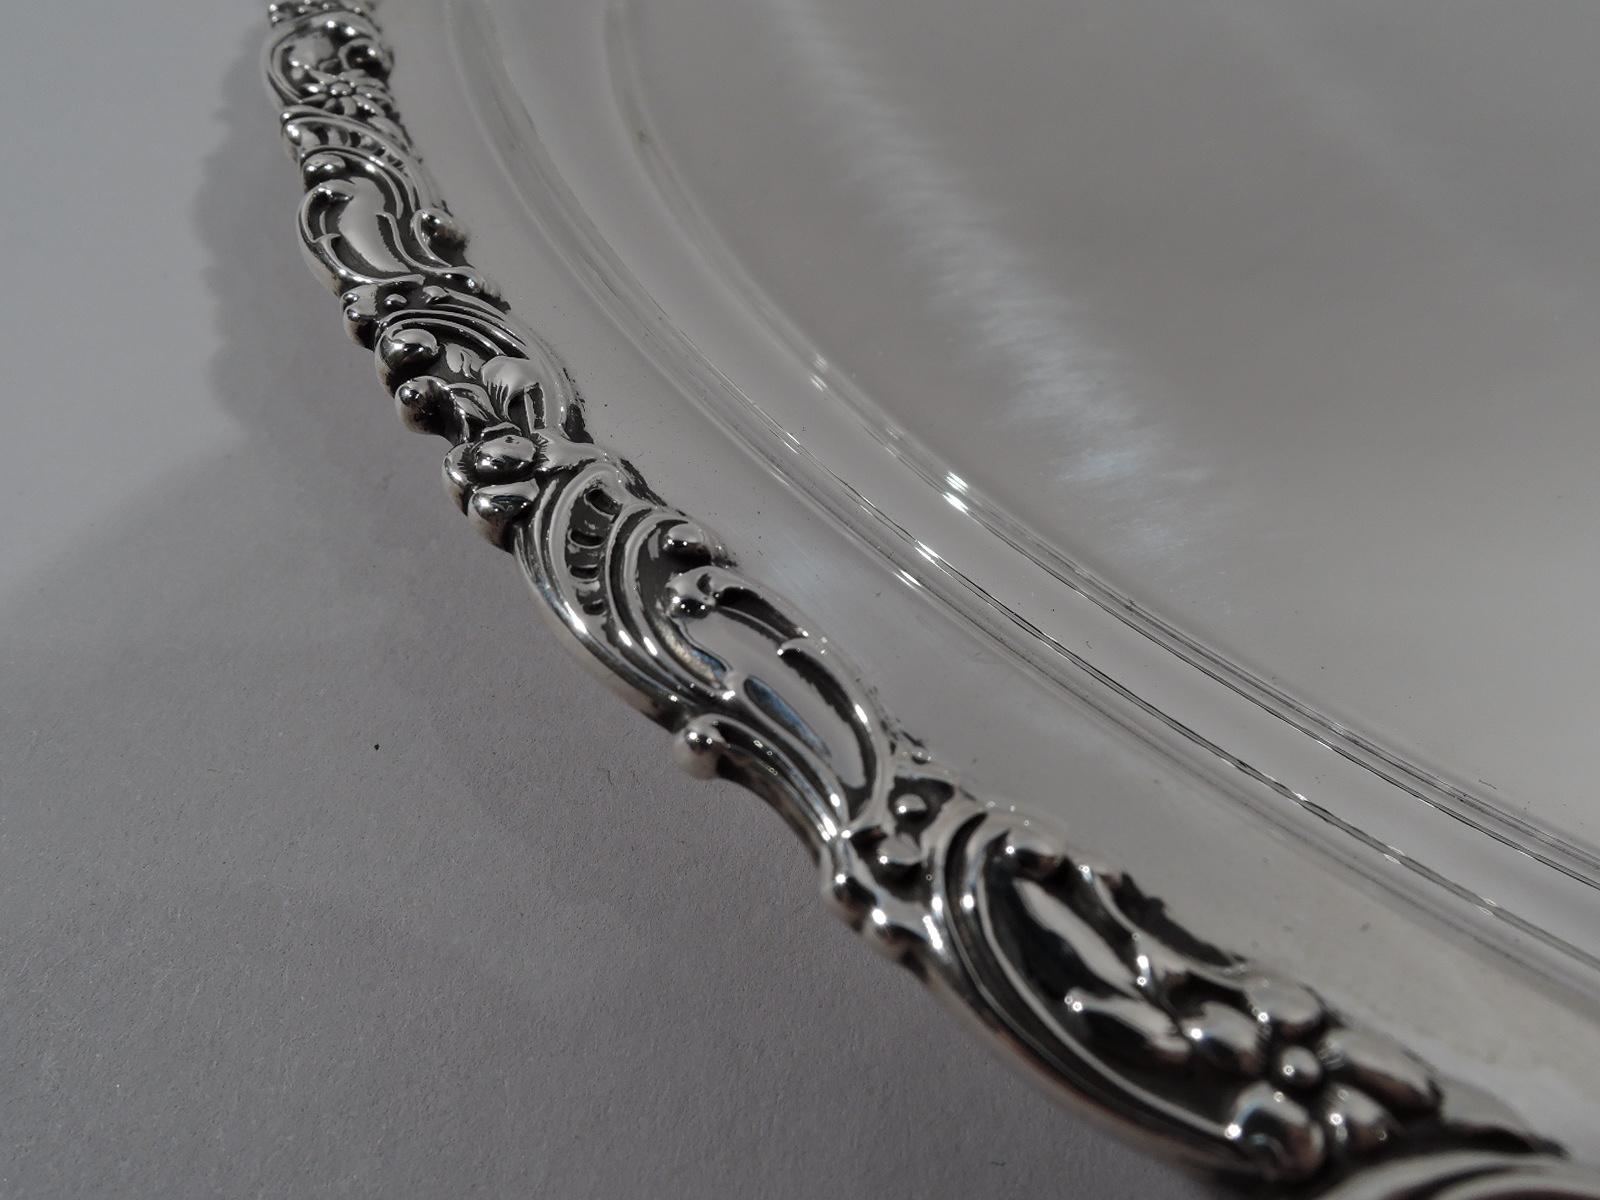 Turn-of-the-century sterling silver serving tray. Retailed by Bailey, Banks & Biddle in Philadelphia. Round; rim everted and applied with scrolls and flowers. Fully marked including maker’s (Fuchs) and retailer’s stamps, and no. 231. Weight: 22.5